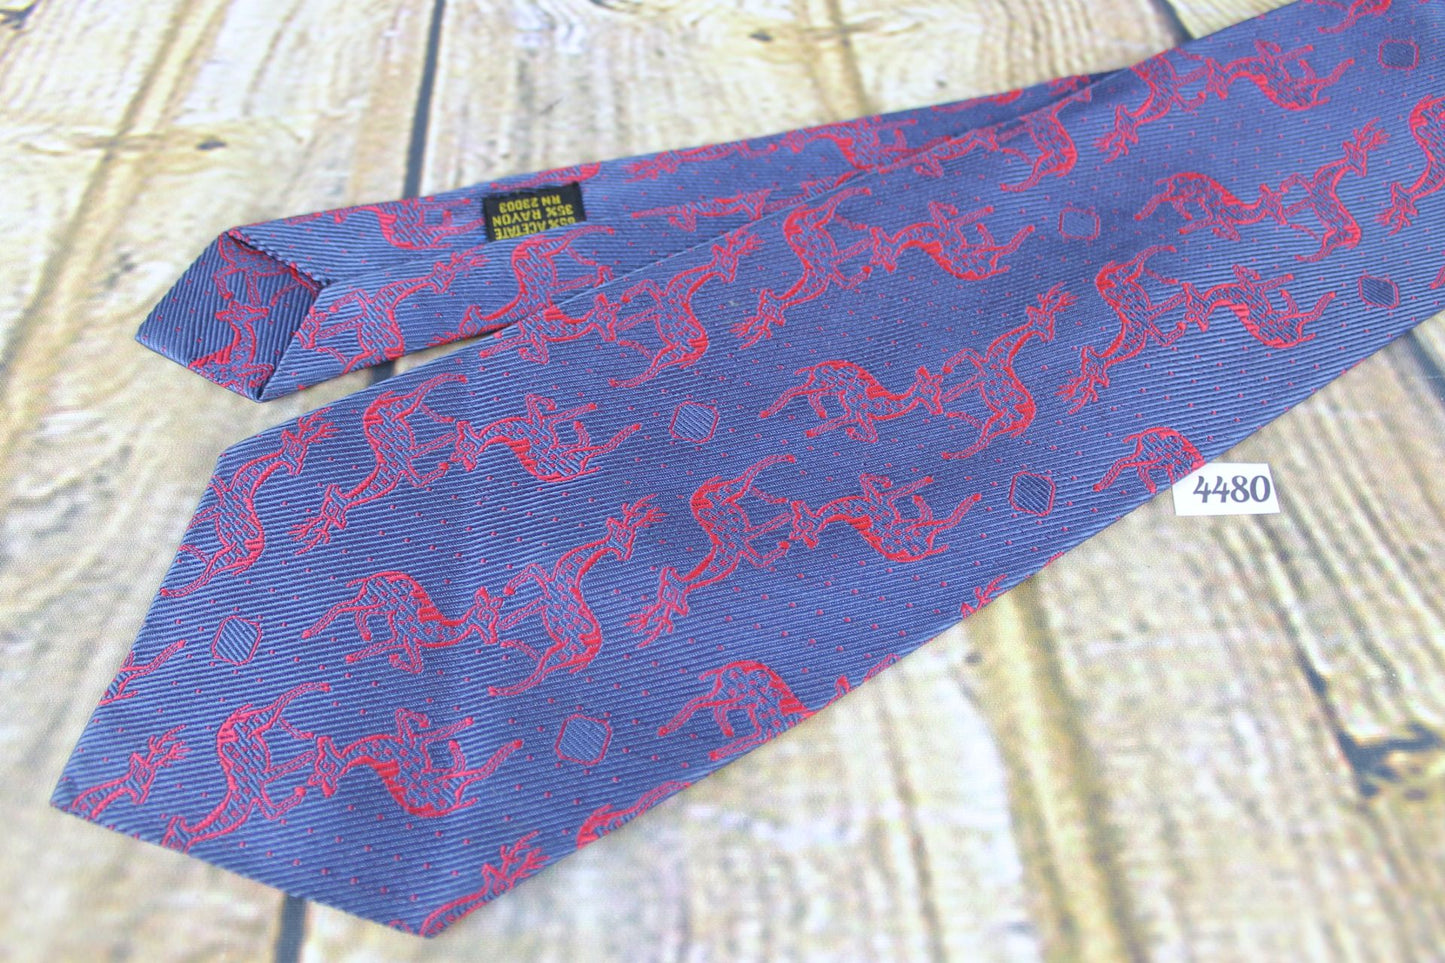 Vintage Blue Tie With Deer Stag Red Woven Repeat Pattern